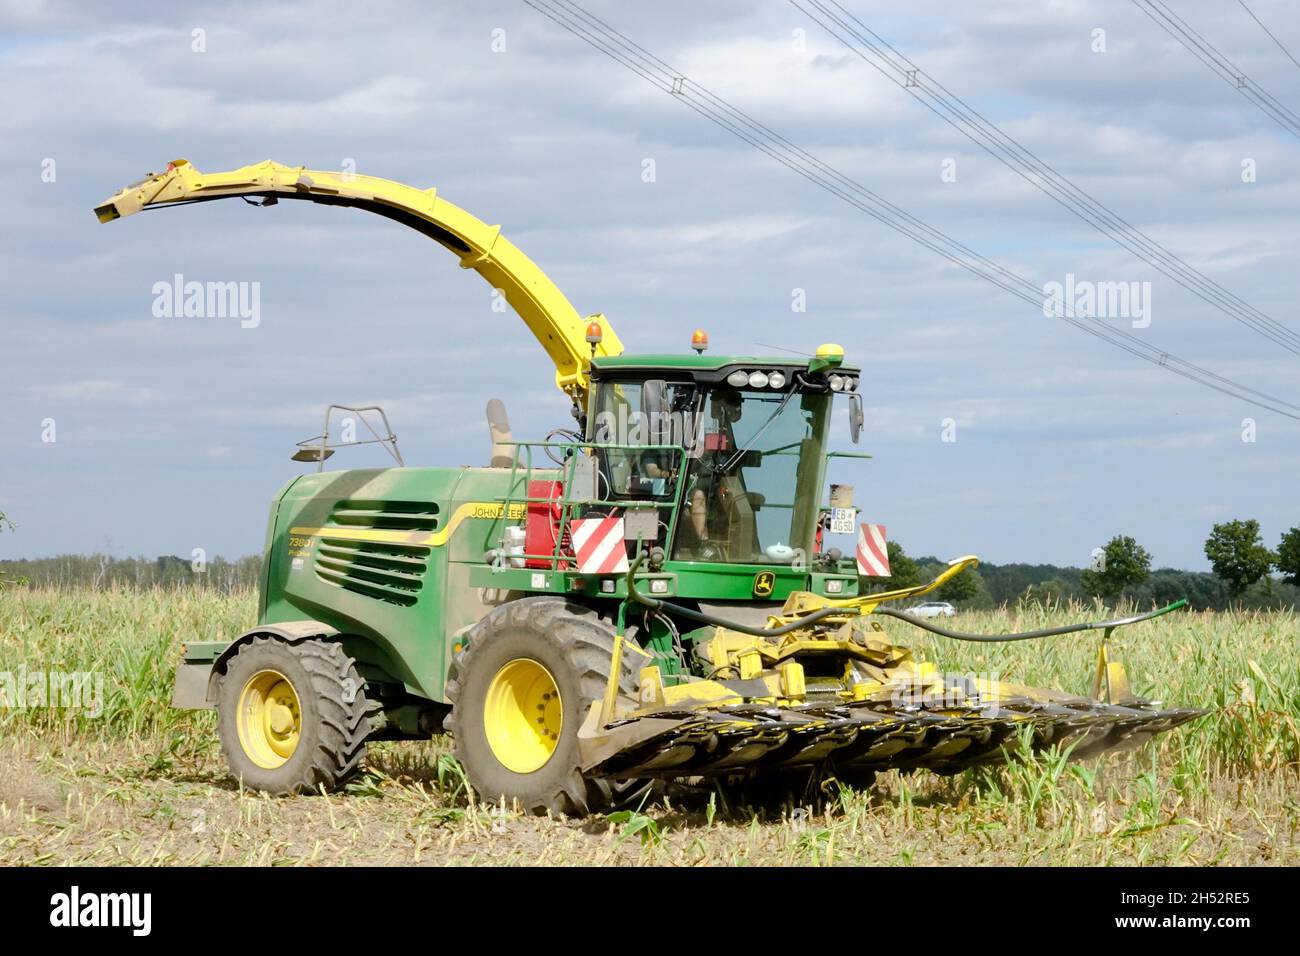 Combine harvester corn maize Agricultural machinery Stock Photo